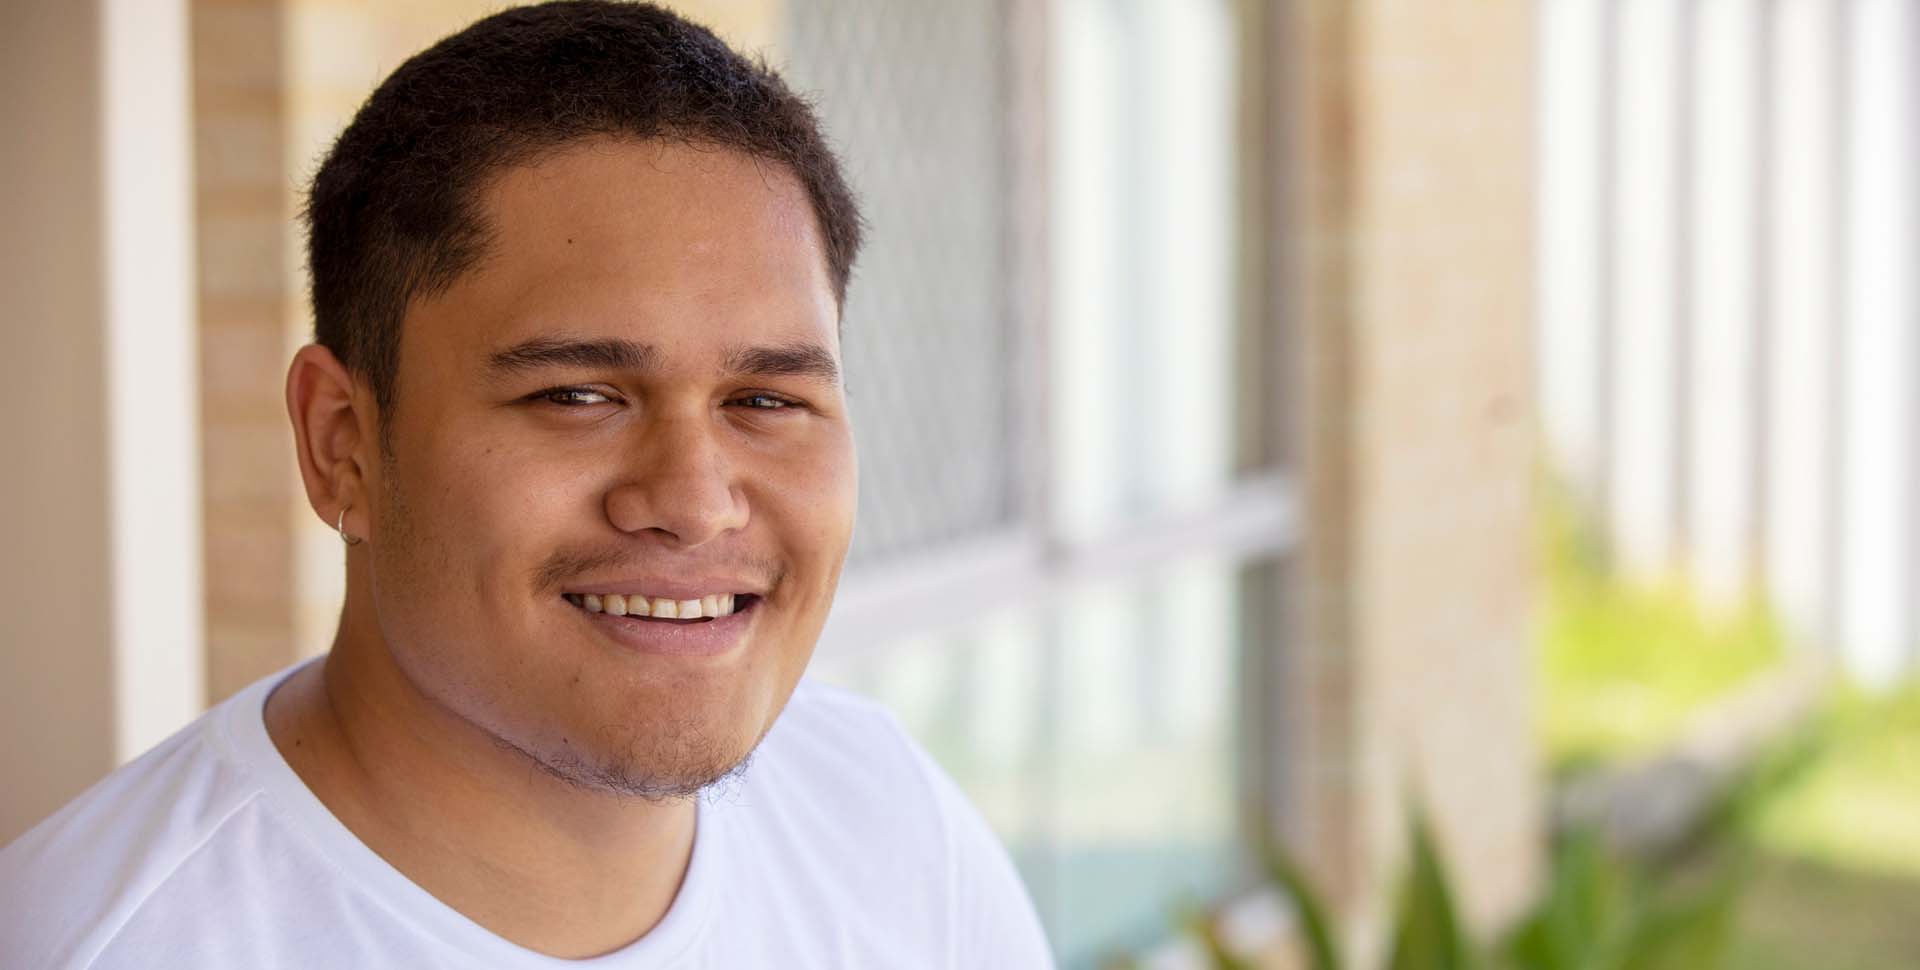 Joshua smiles after leaving juvenile detention and making changes for a better life